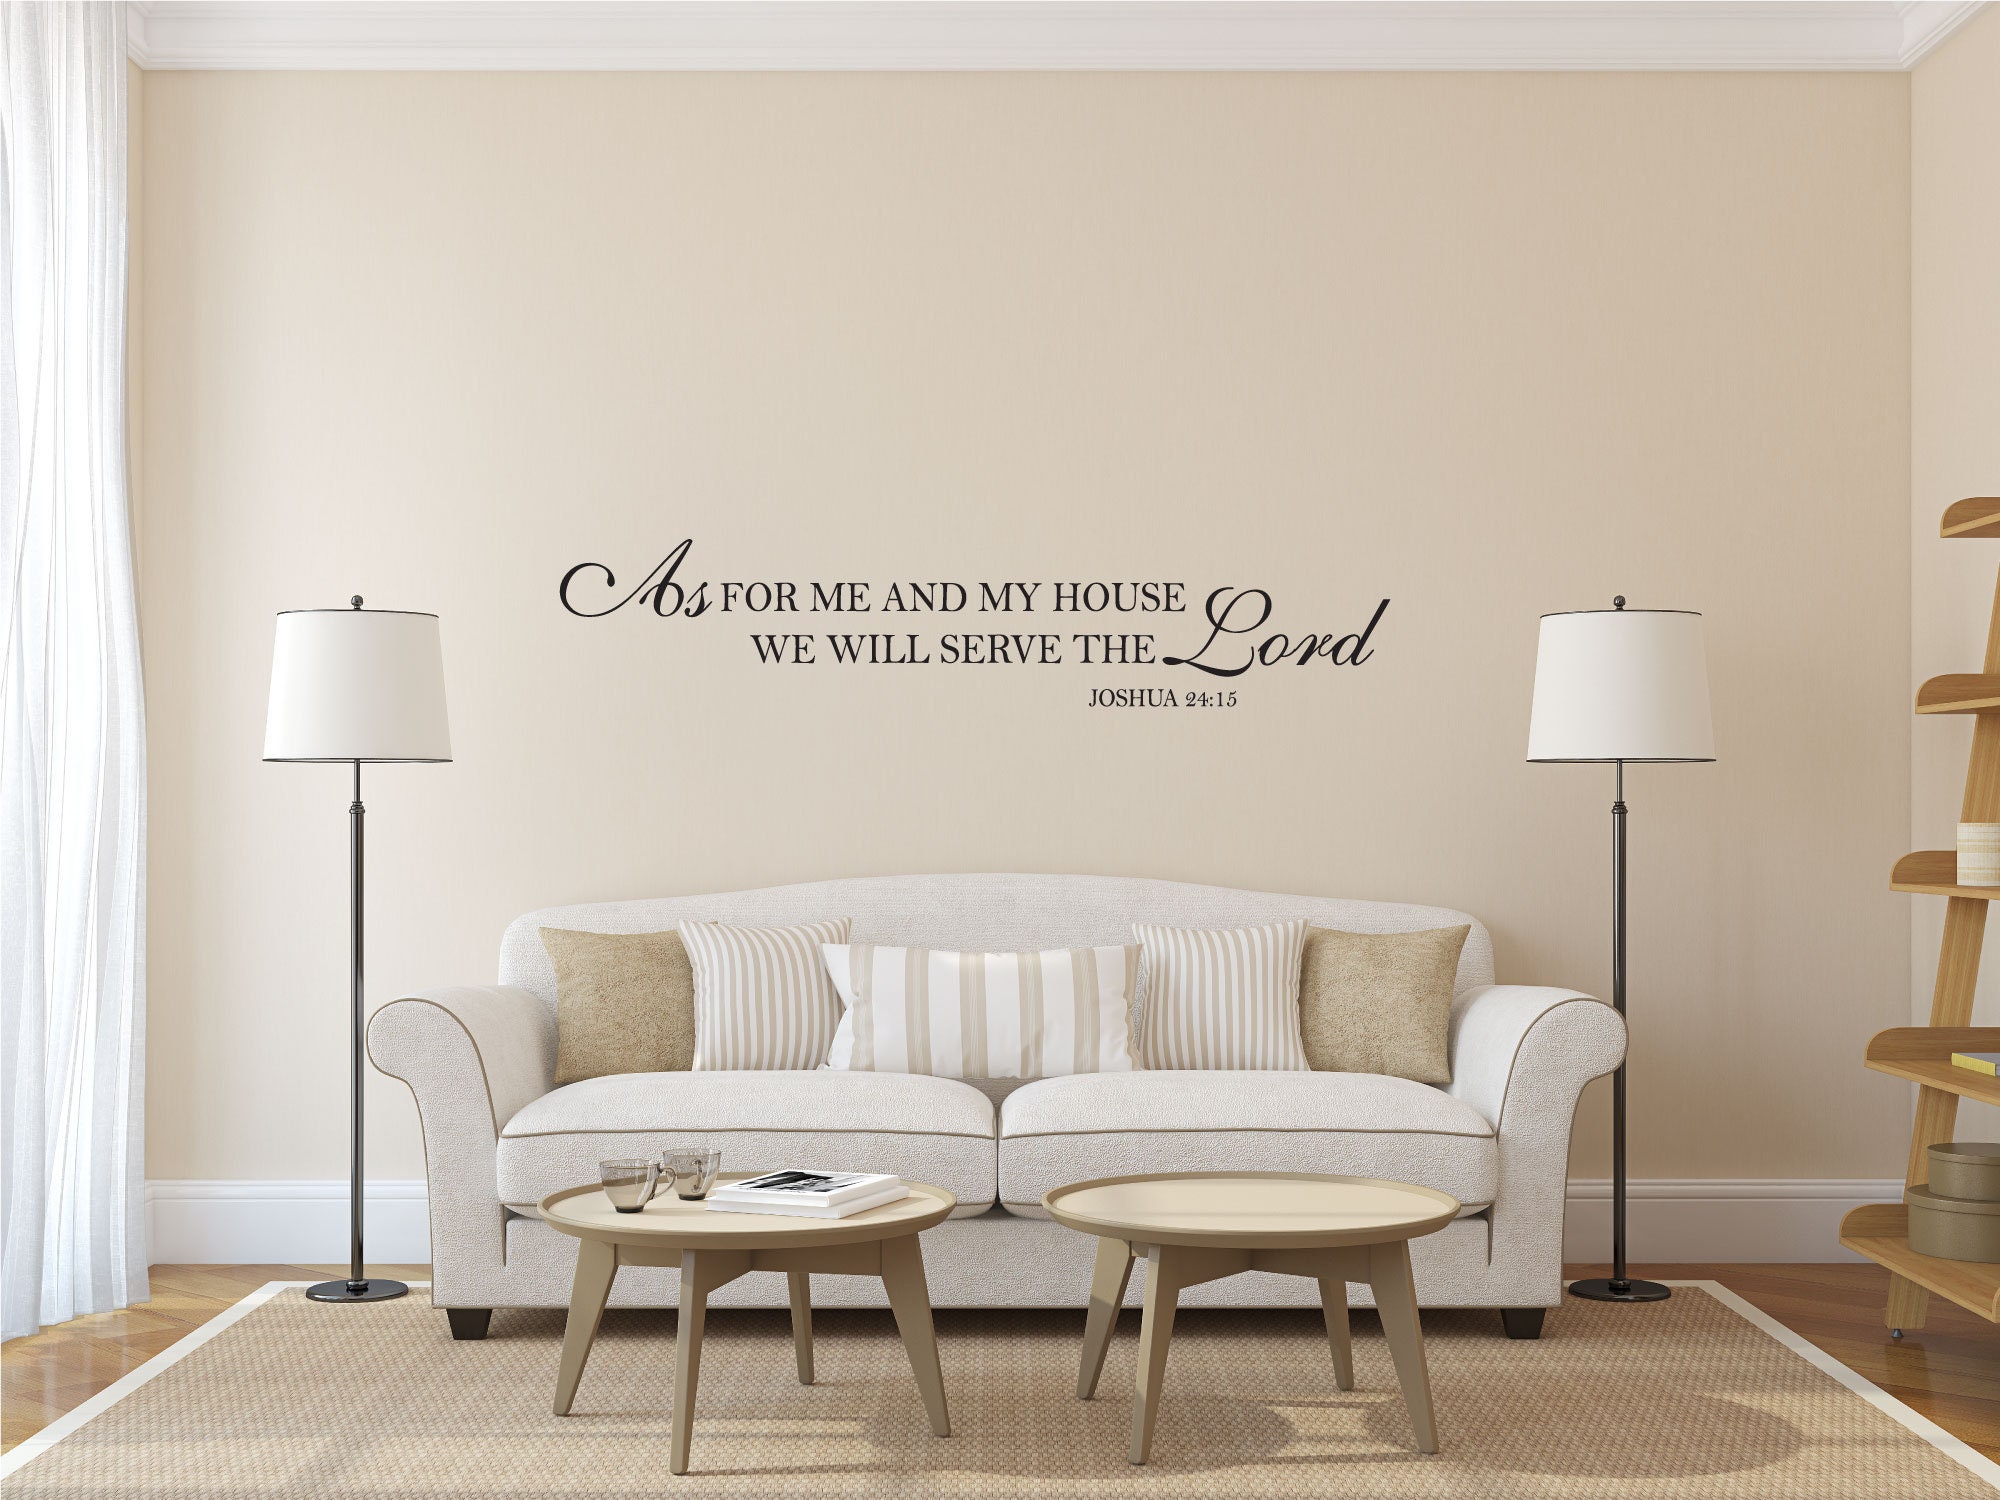 As for me and my house we will serve the lord wall decal | Etsy